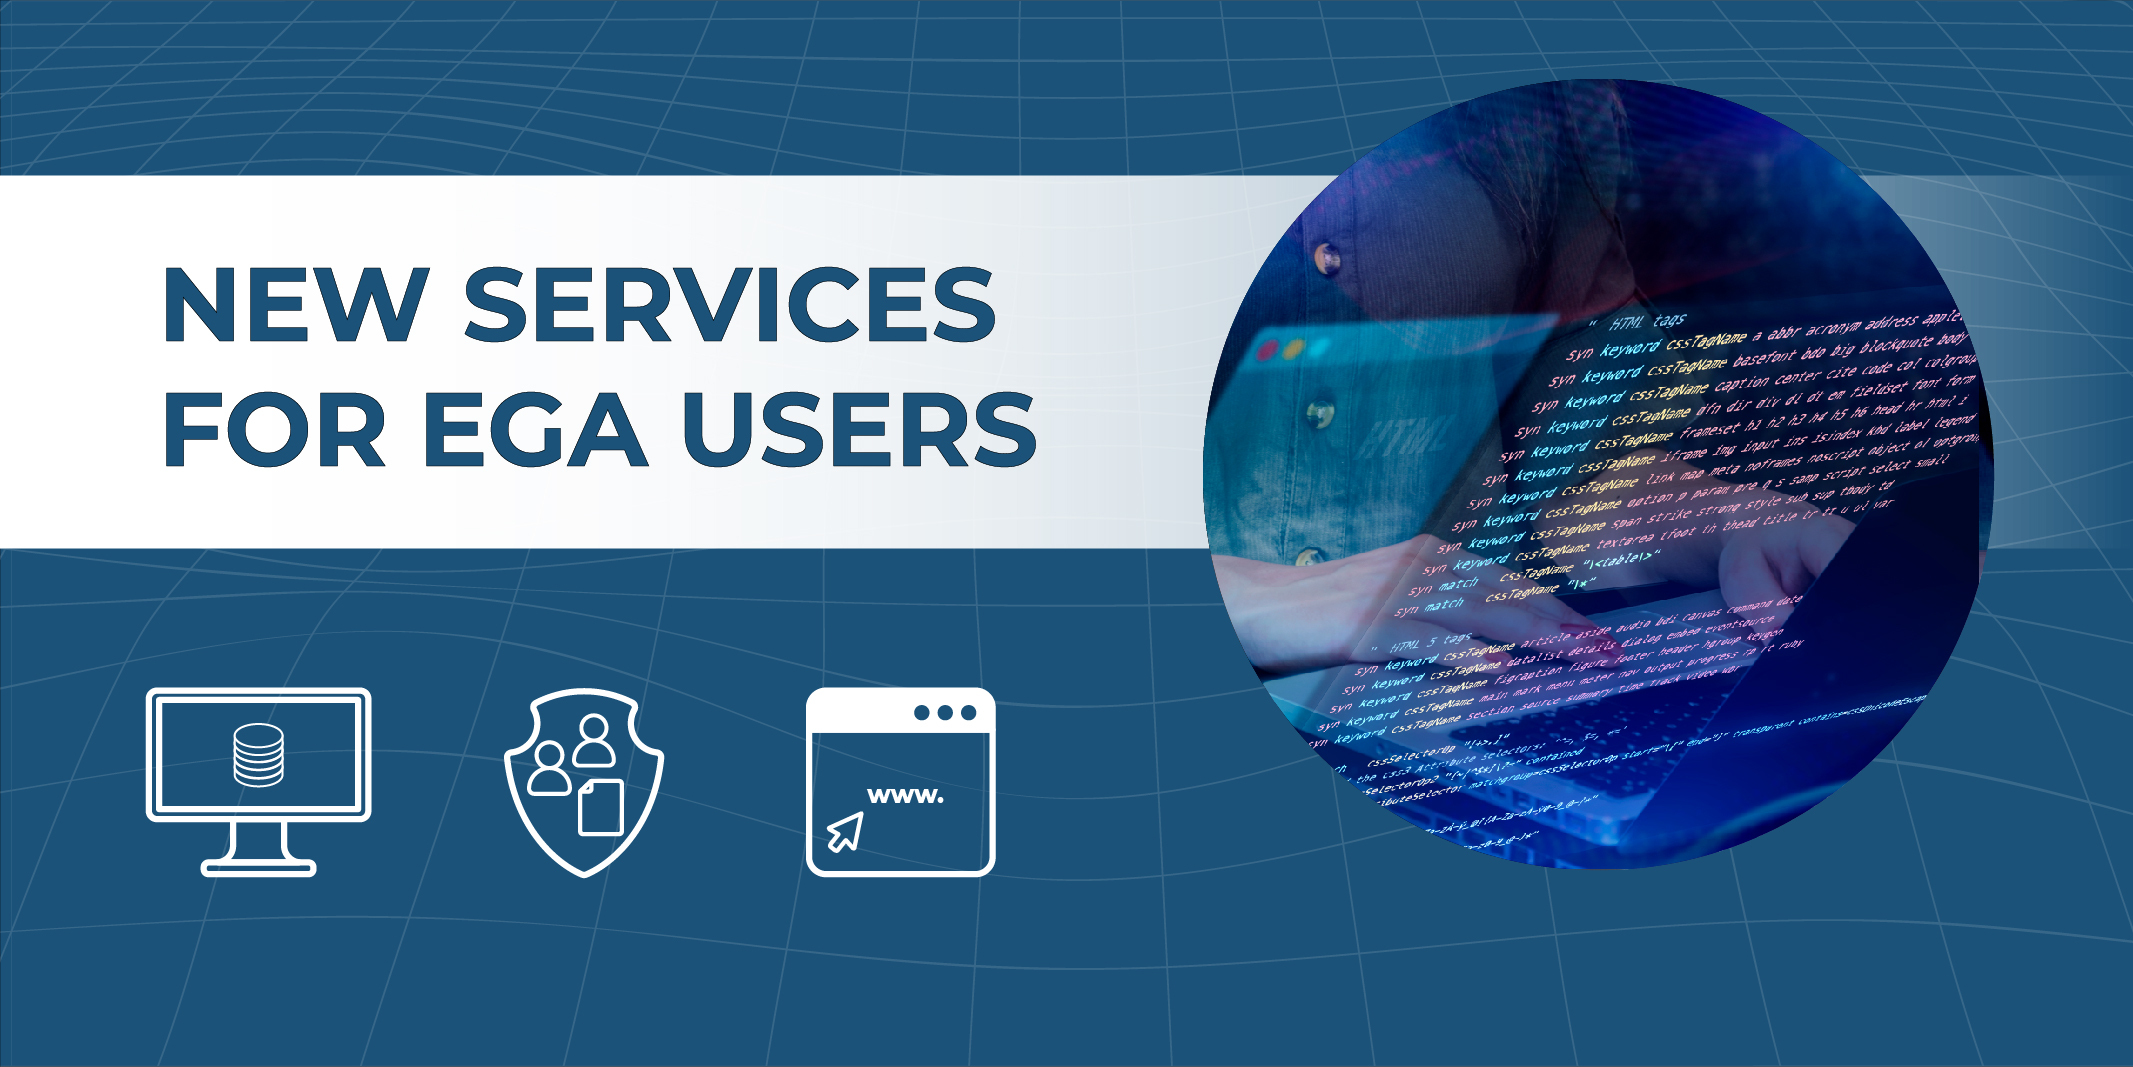 New set of services for all users unveiled at the EGA  main image